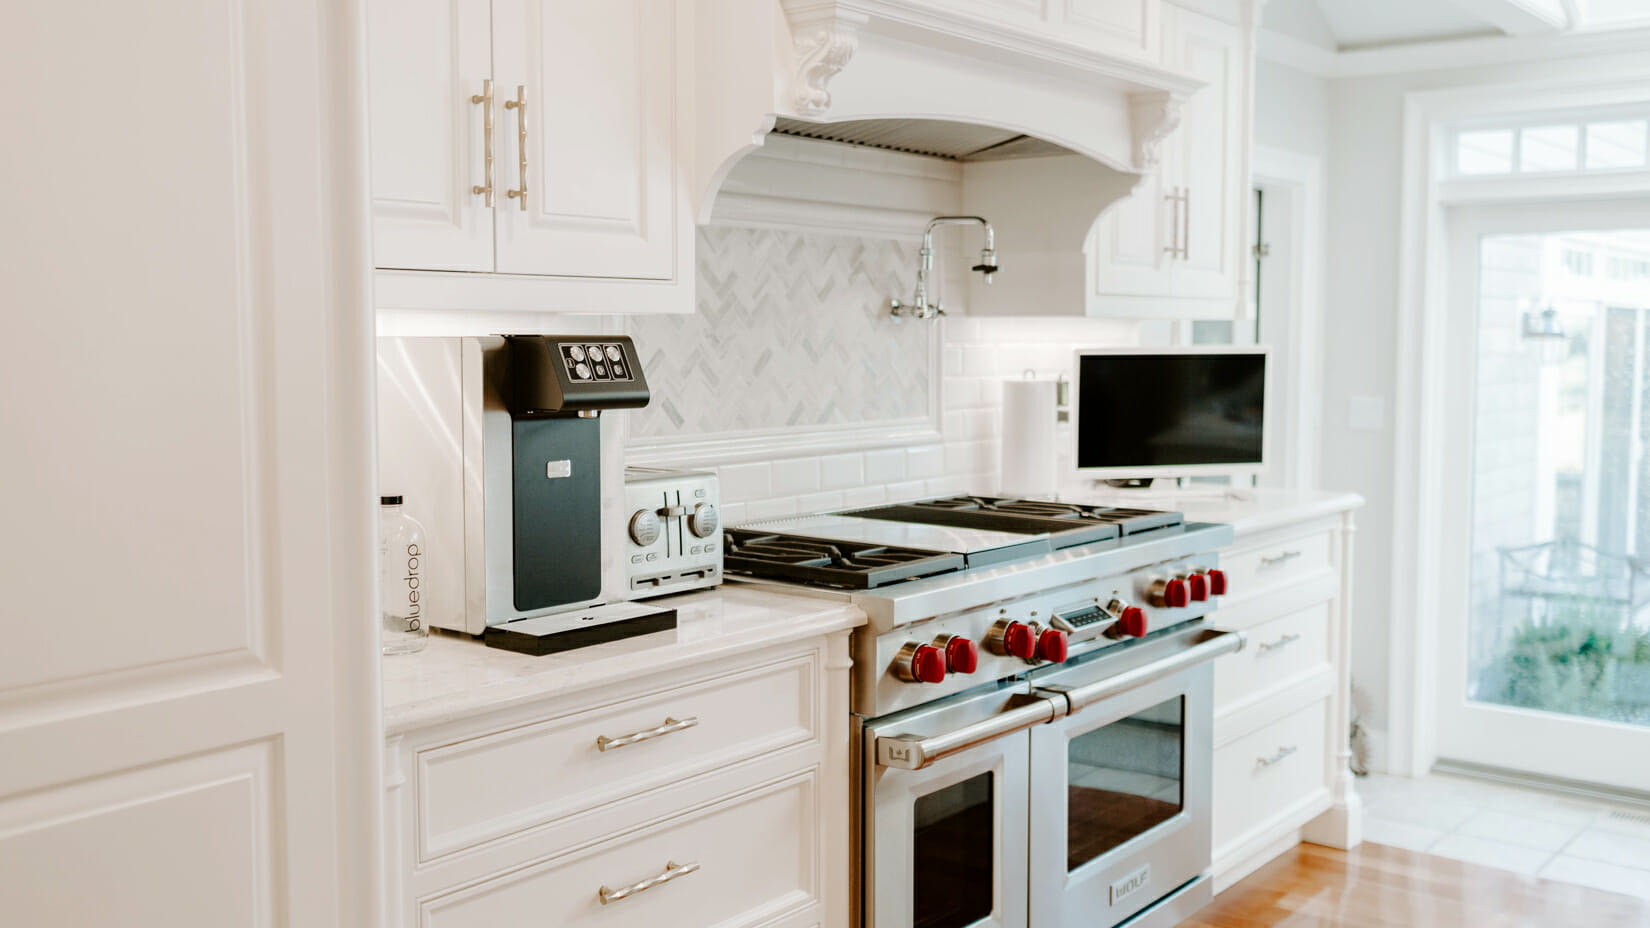 A still and sparkling system on a residential kitchen counter.